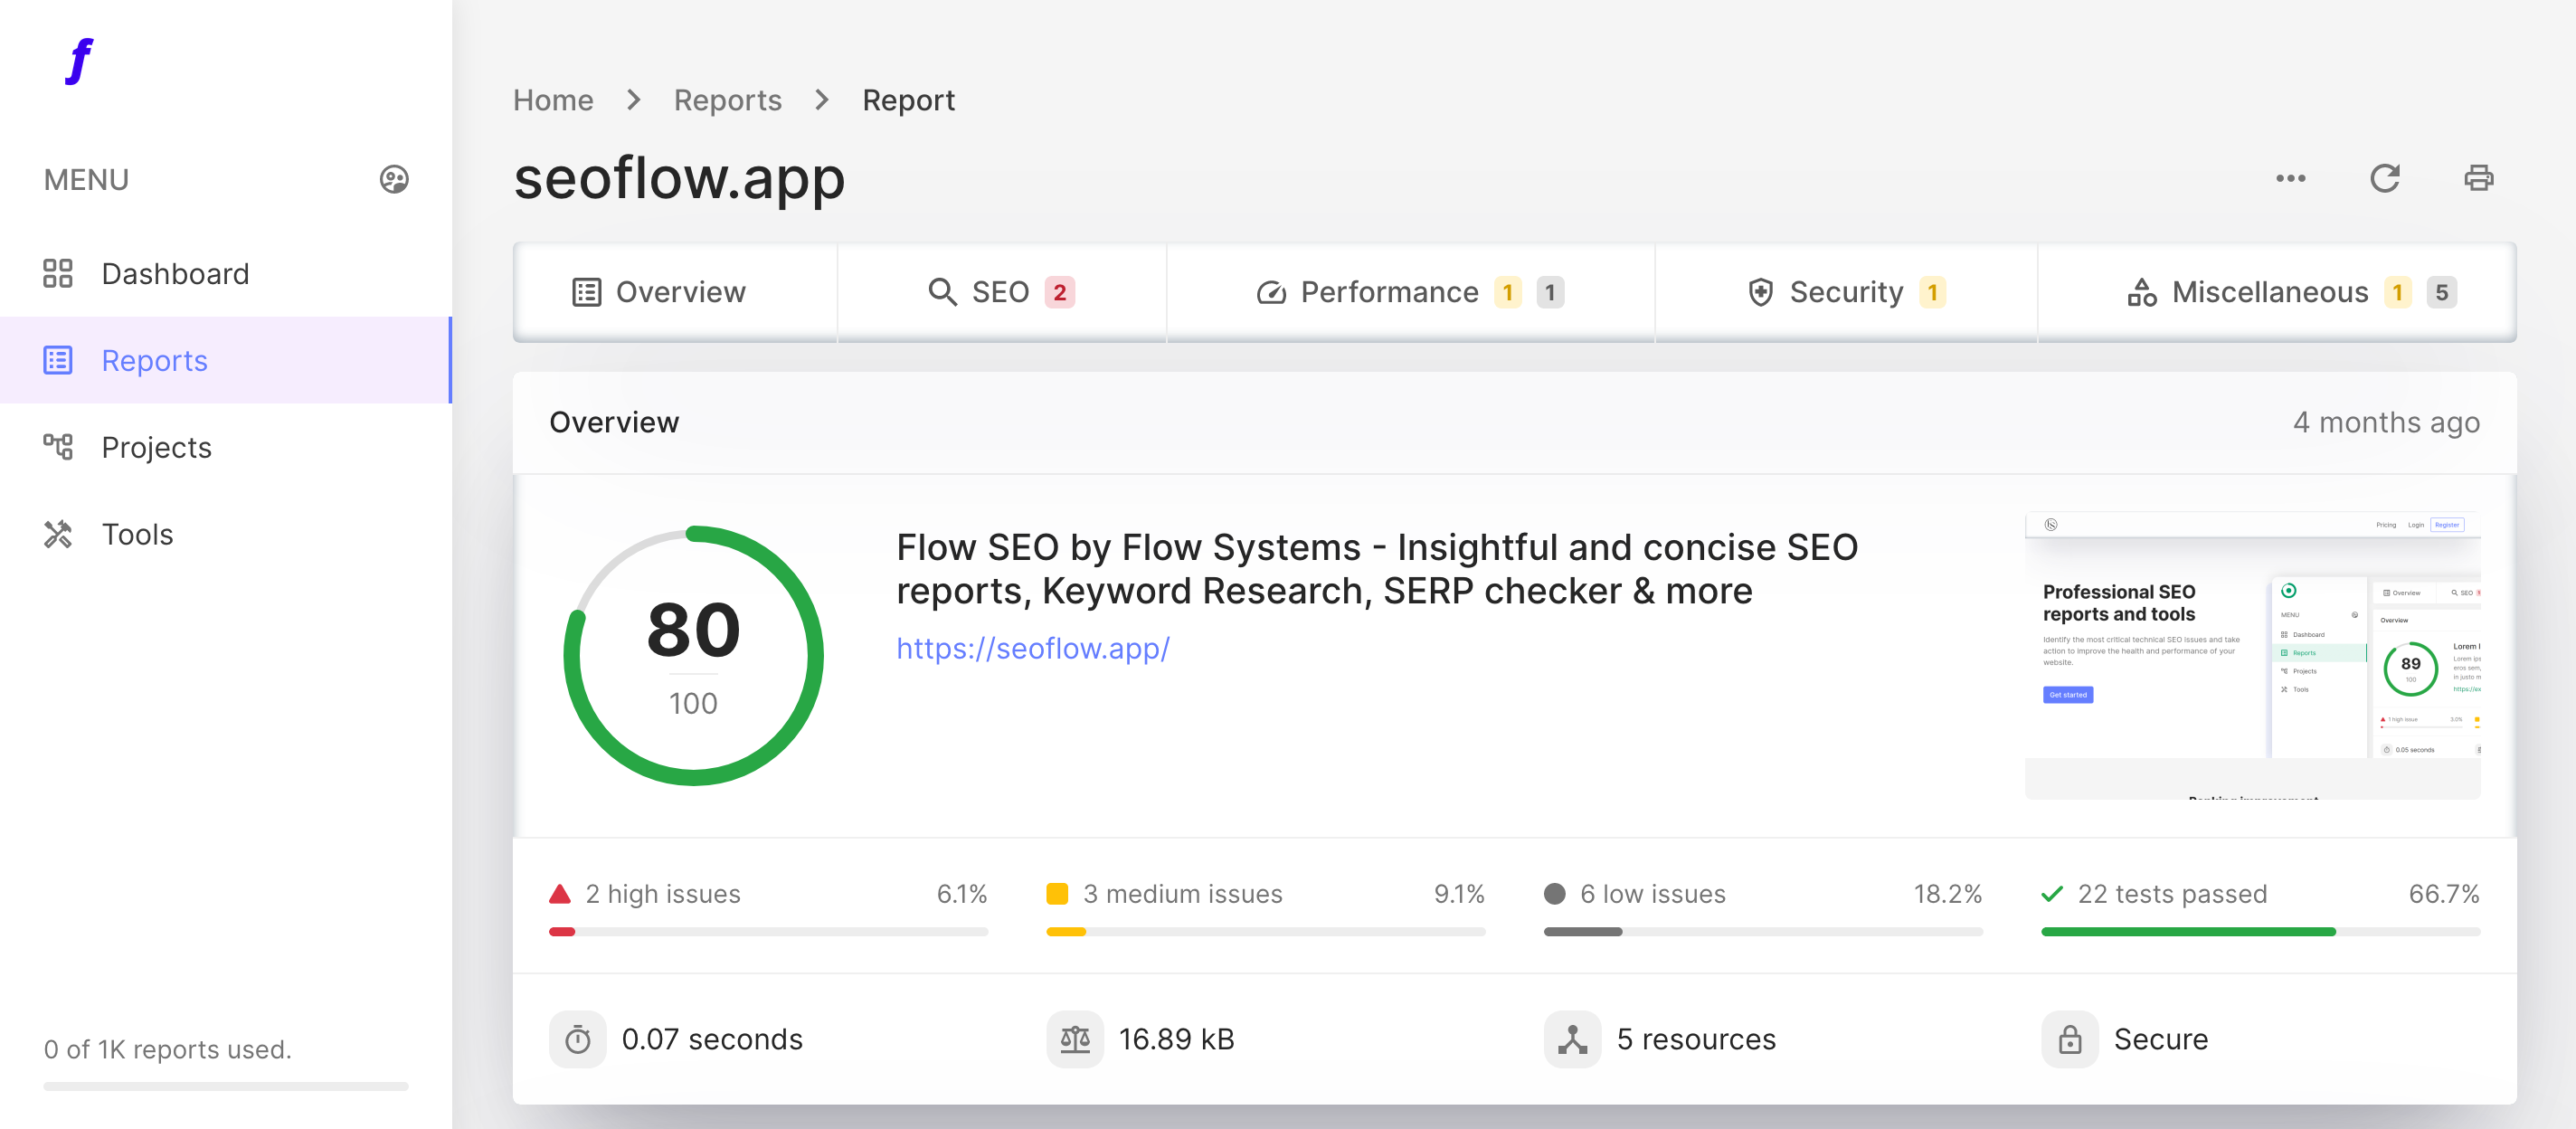 Flow SEO by Flow Systems